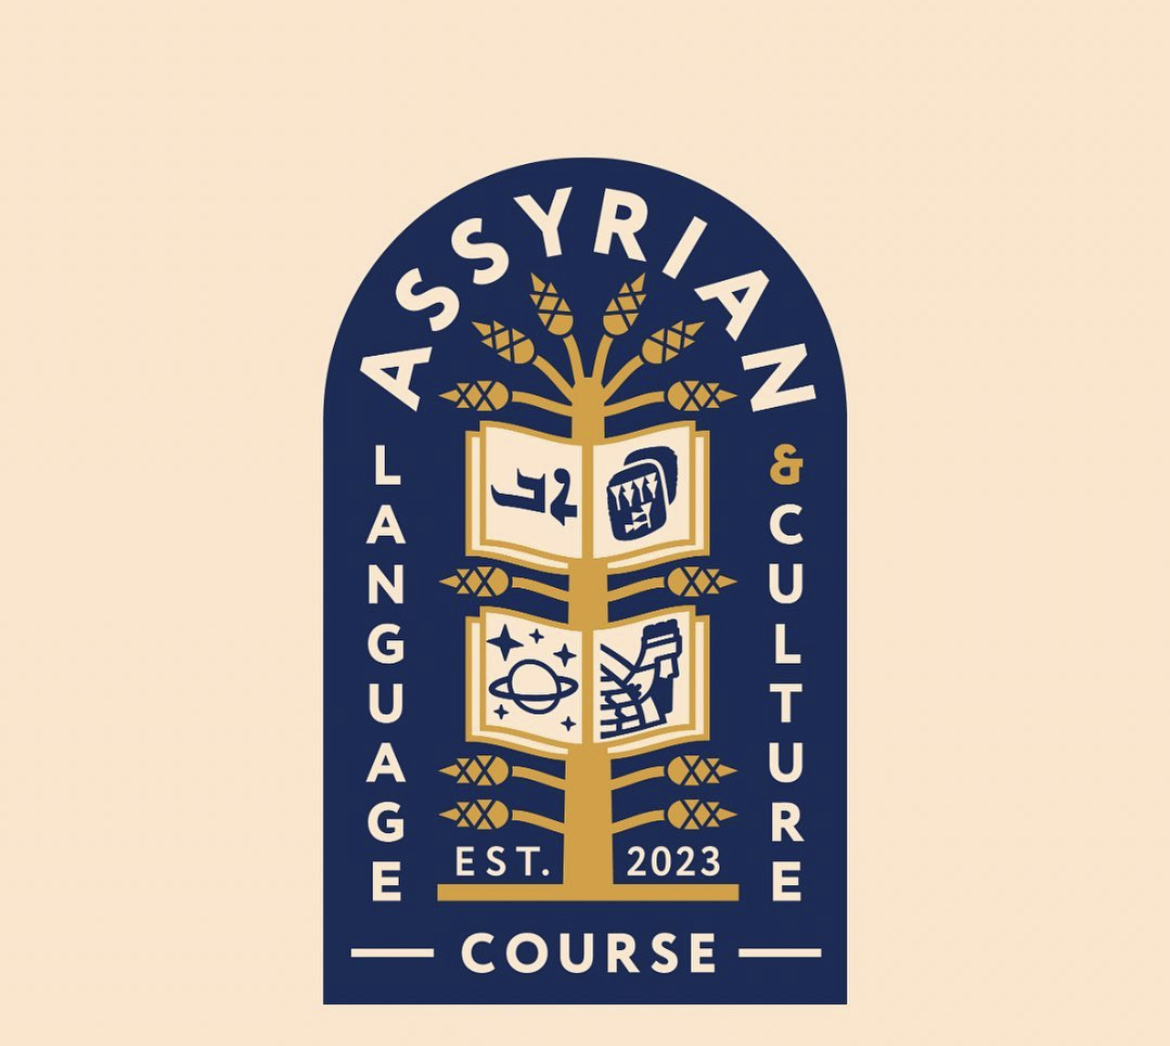 An official logo representing Niles Wests new Assyrian Language and Culture course via @d219assyrian on Instagram.